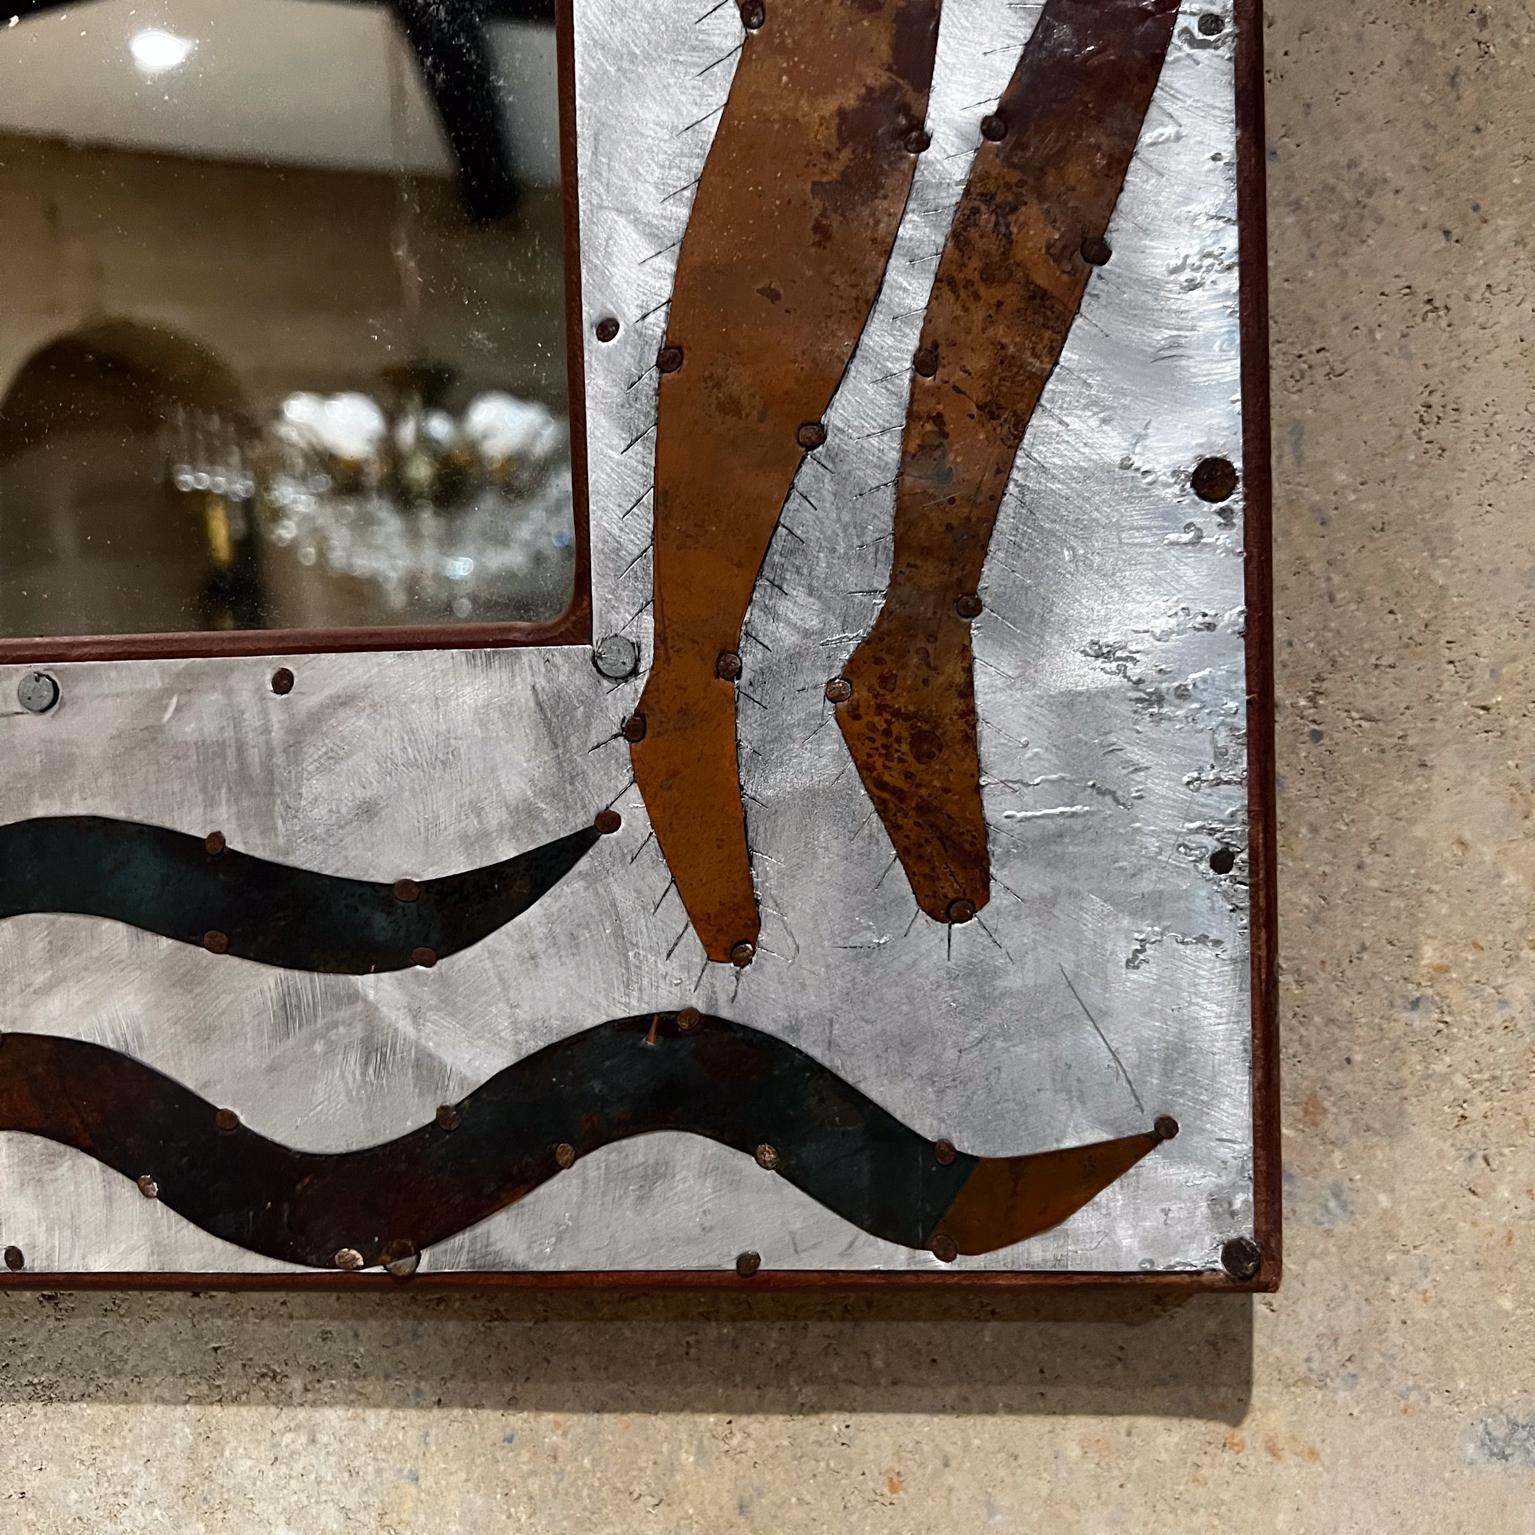 1960s Modernist Wall Mirror Mixed Metal Art Design In Good Condition For Sale In Chula Vista, CA